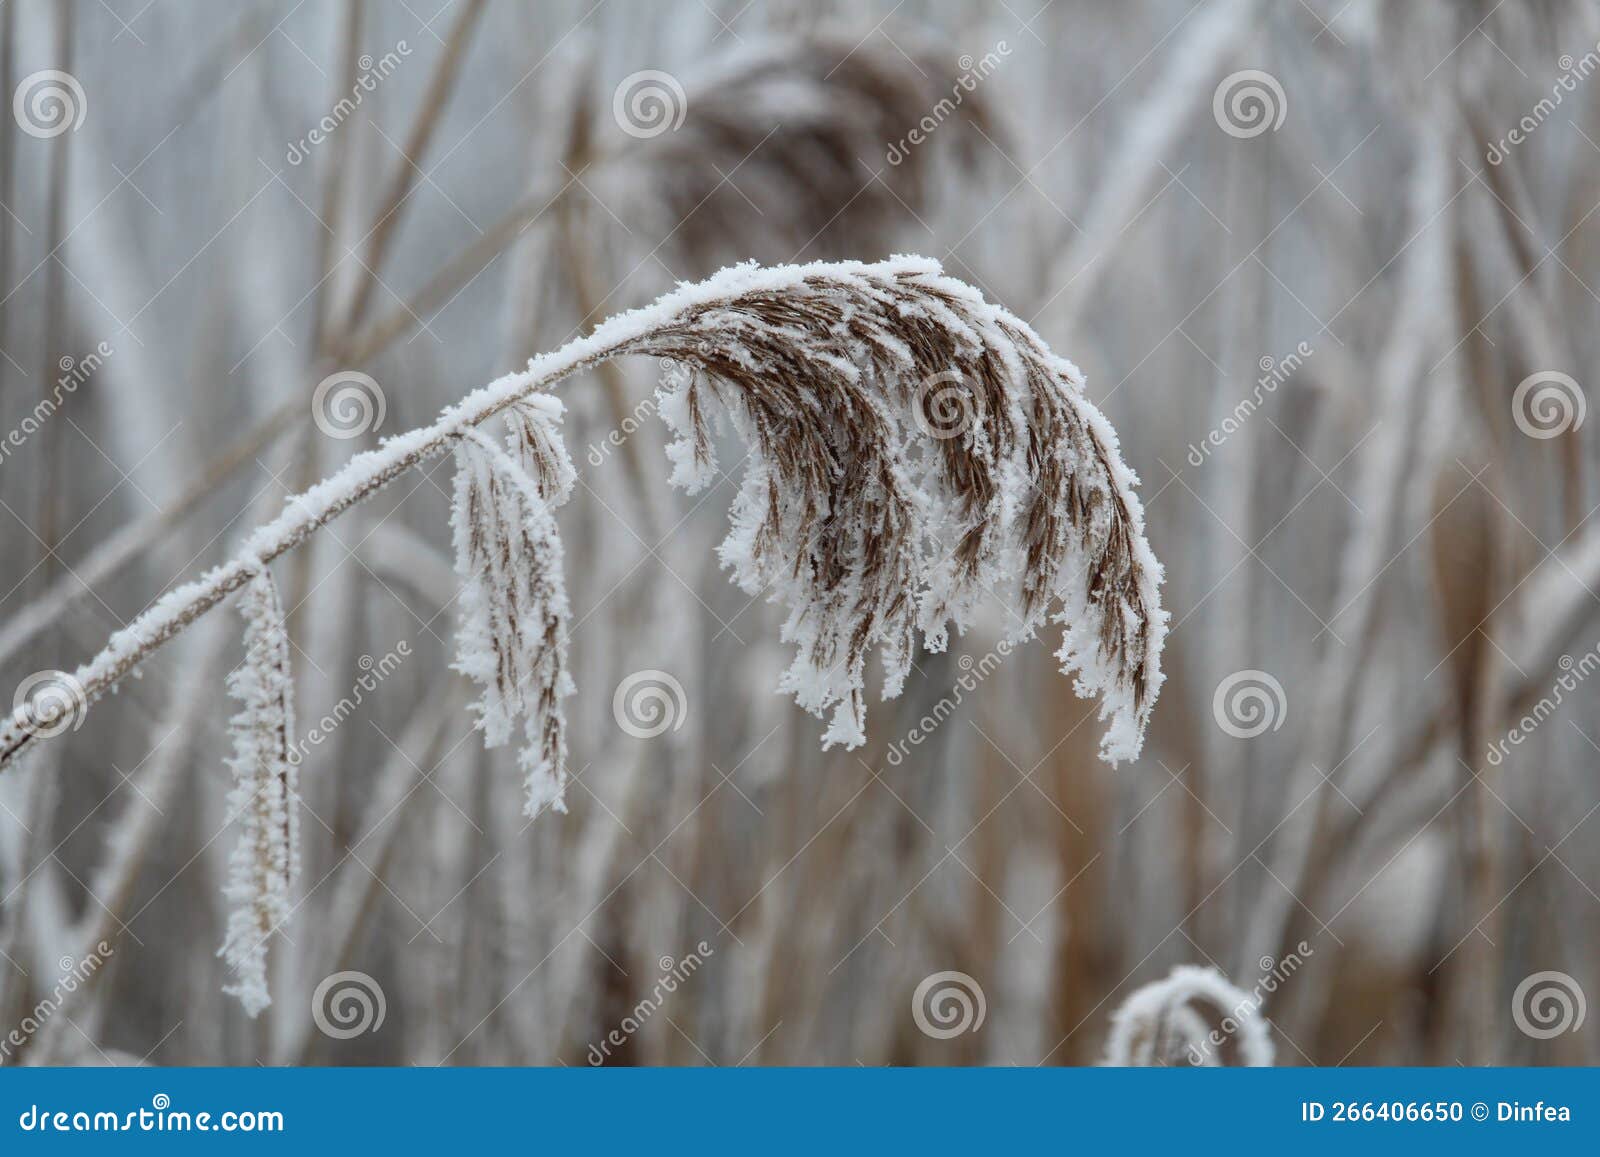 Bowing Water Reed Covered with Hoarfrost and Rime. Stock Photo - Image ...